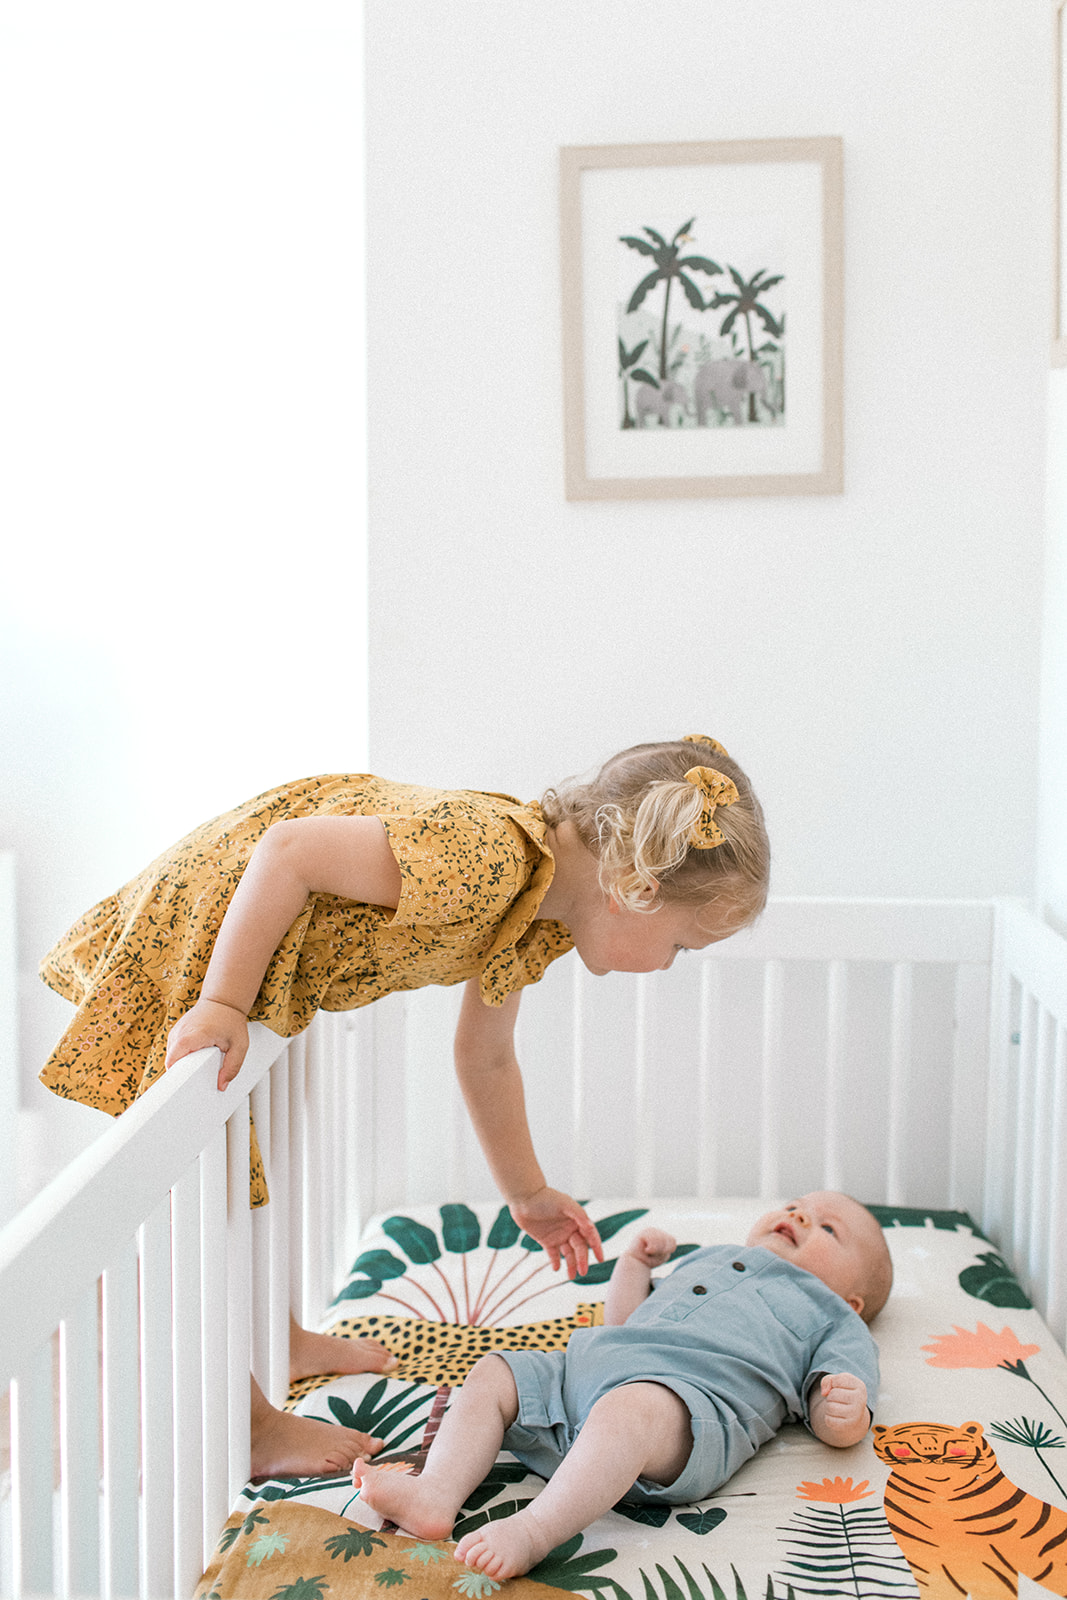 Big sister reaches into crib during family photoshoot